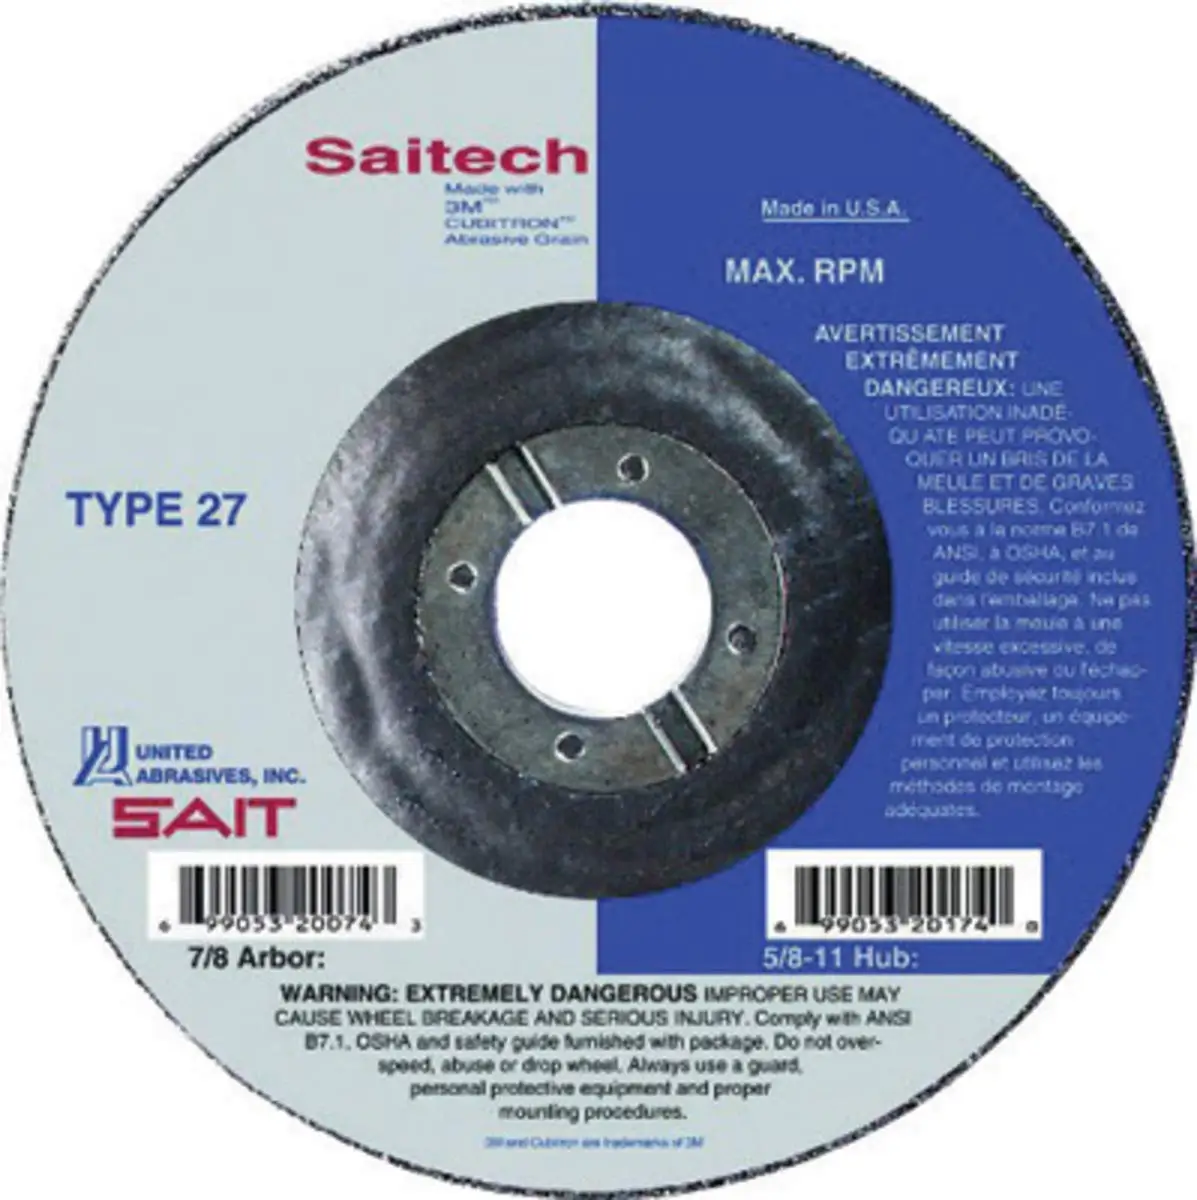 5 x 1//4 x 5//8-11 Ceramic Grit 5 x 1//4 x 5//8-11 Ceramic Grit 3M 66549 High Performance Depressed Center Grinding Wheel T27 Quick Change Pack of 10 Pack of 10